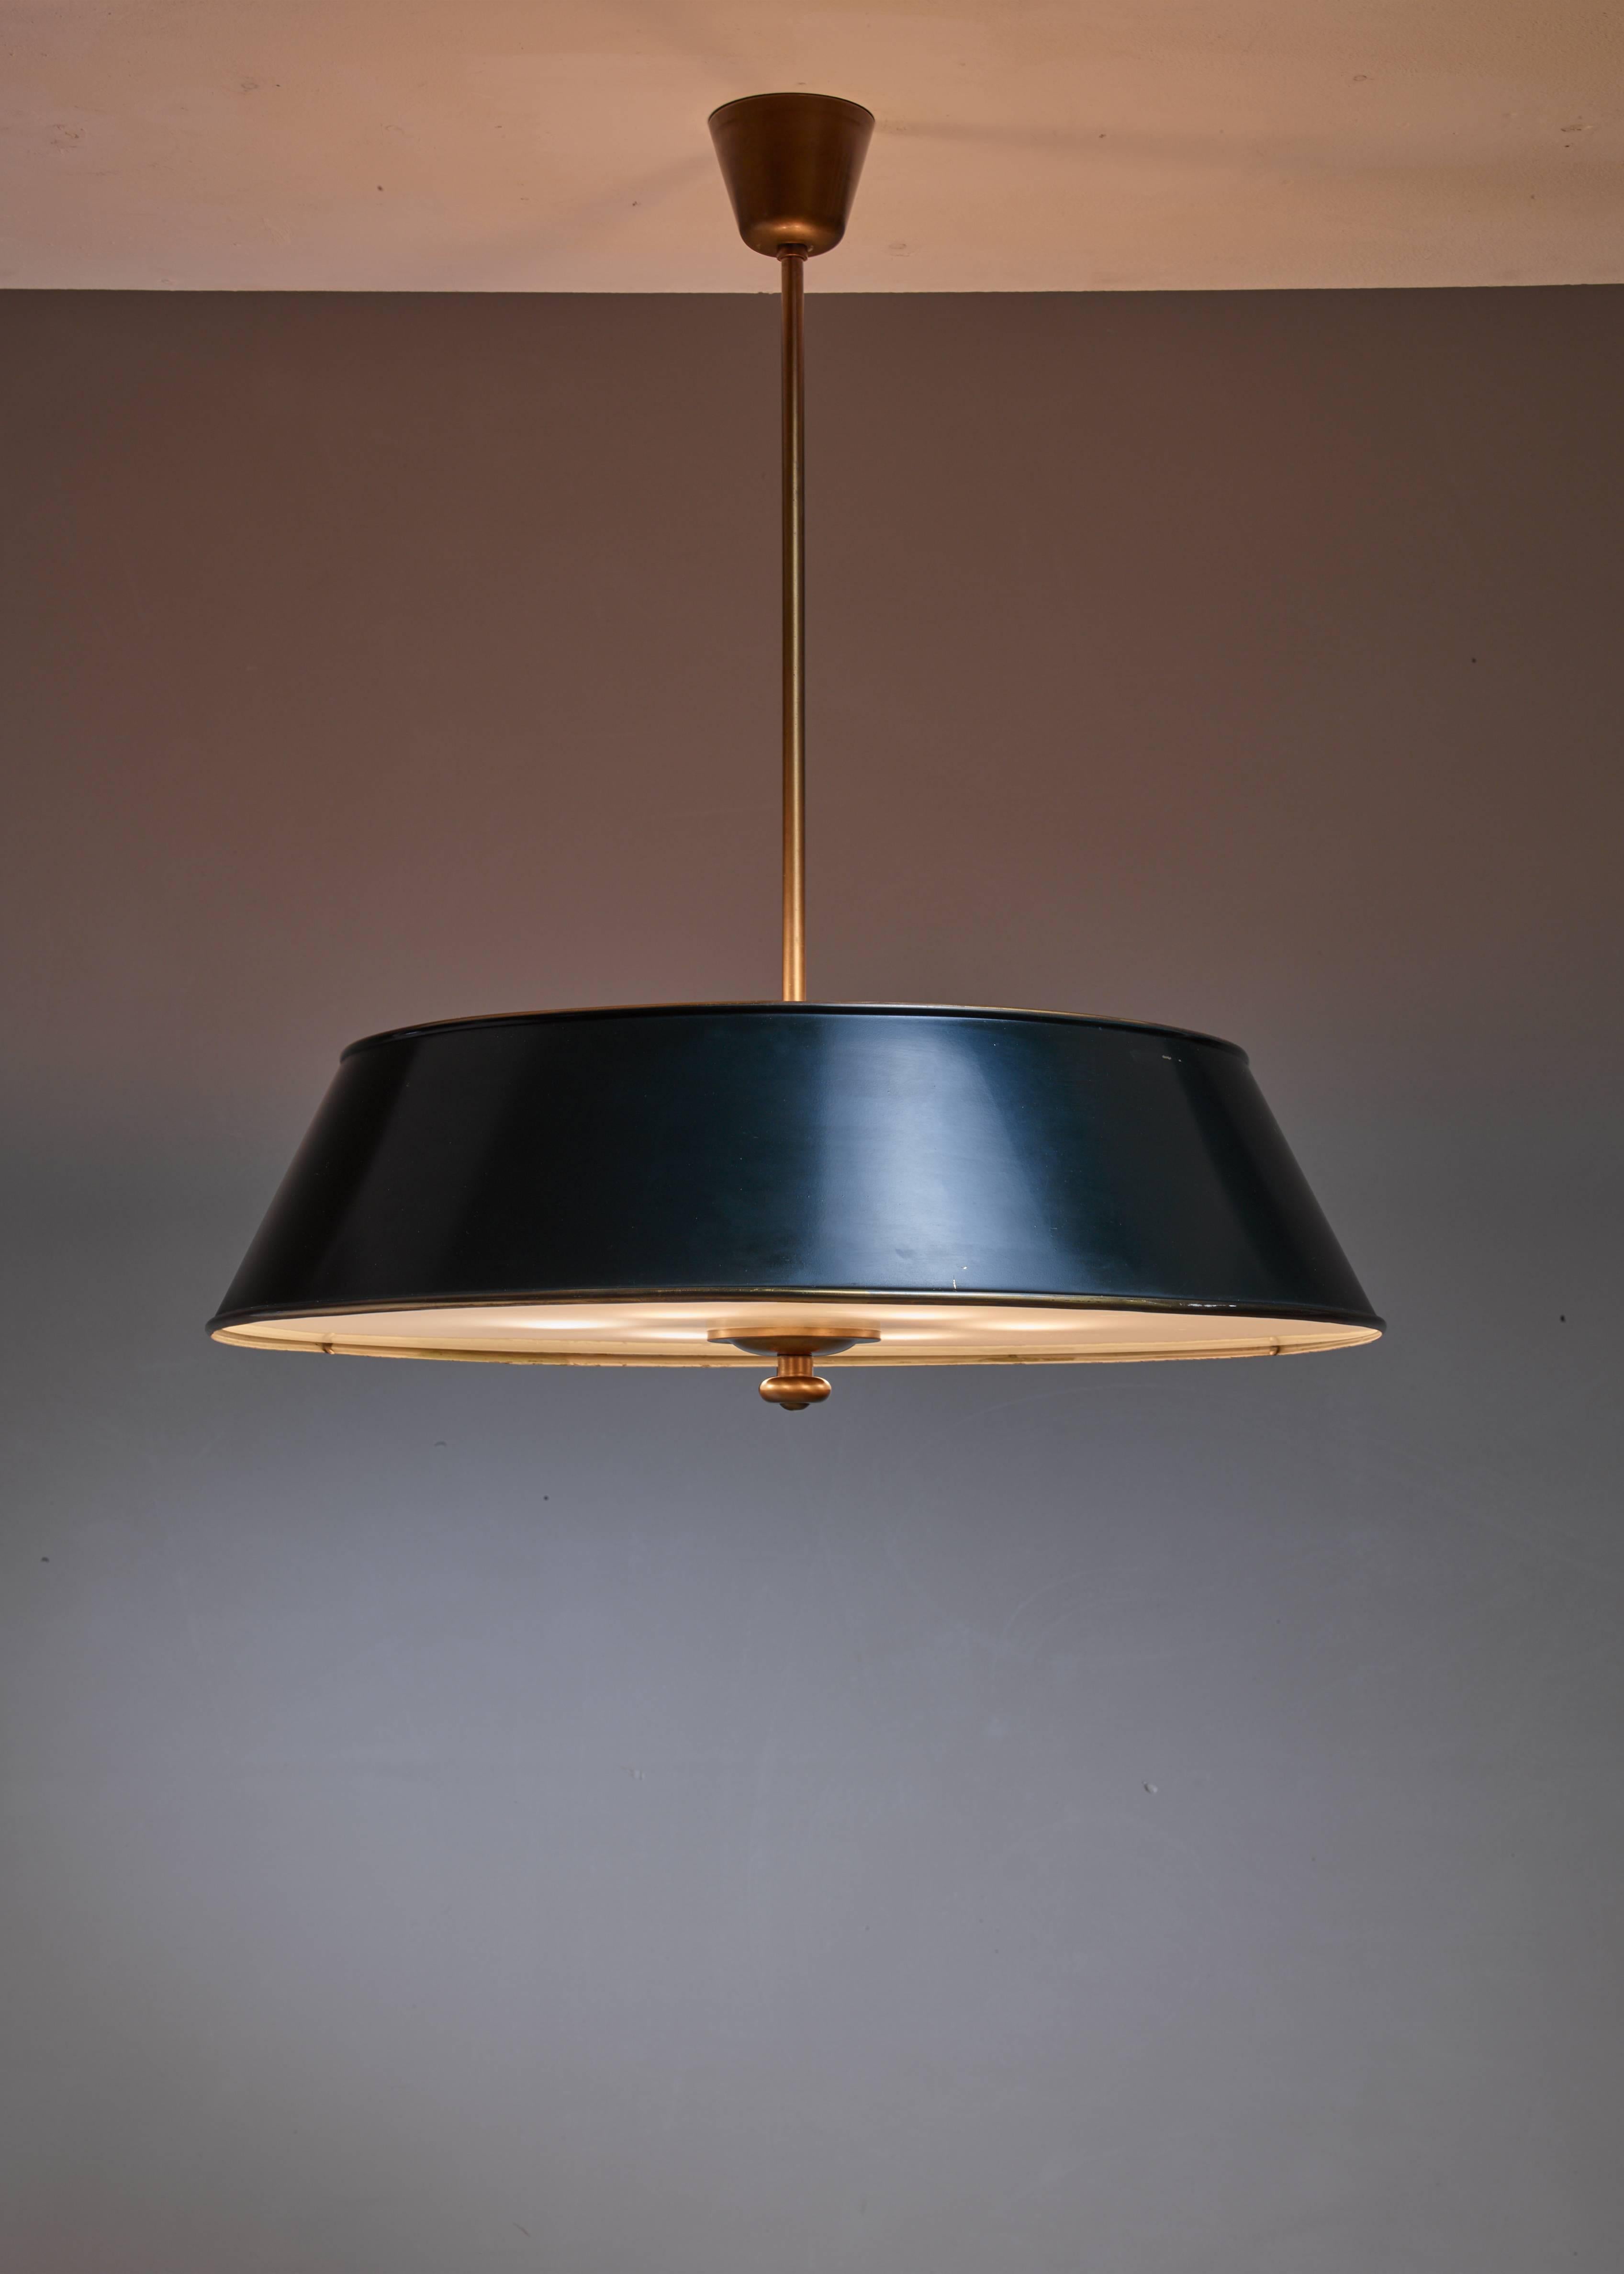 A Modernist pendant by Swedish designer and sculpture Harald Notini. The lamp is made of dark green or nearly black lacquered metal and a brass stem. The lamp has a frosted glass diffuser. It has light bulbs inside and on top of the shade.

    